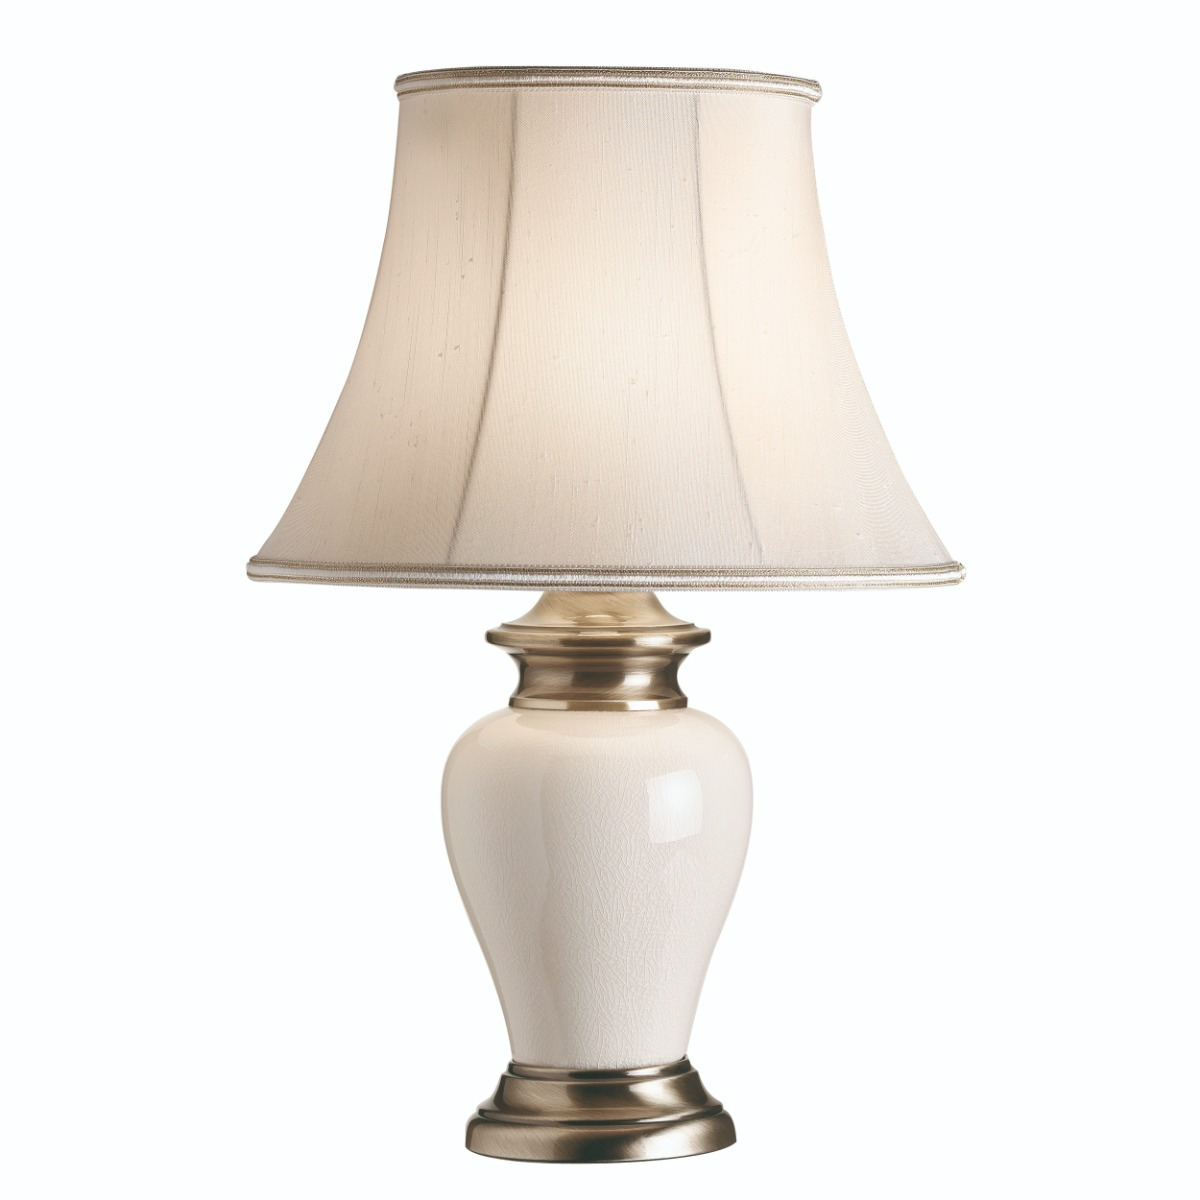 Endon DALSTON-TLAB Crackle Glaze Effect Table Lamp In Cream